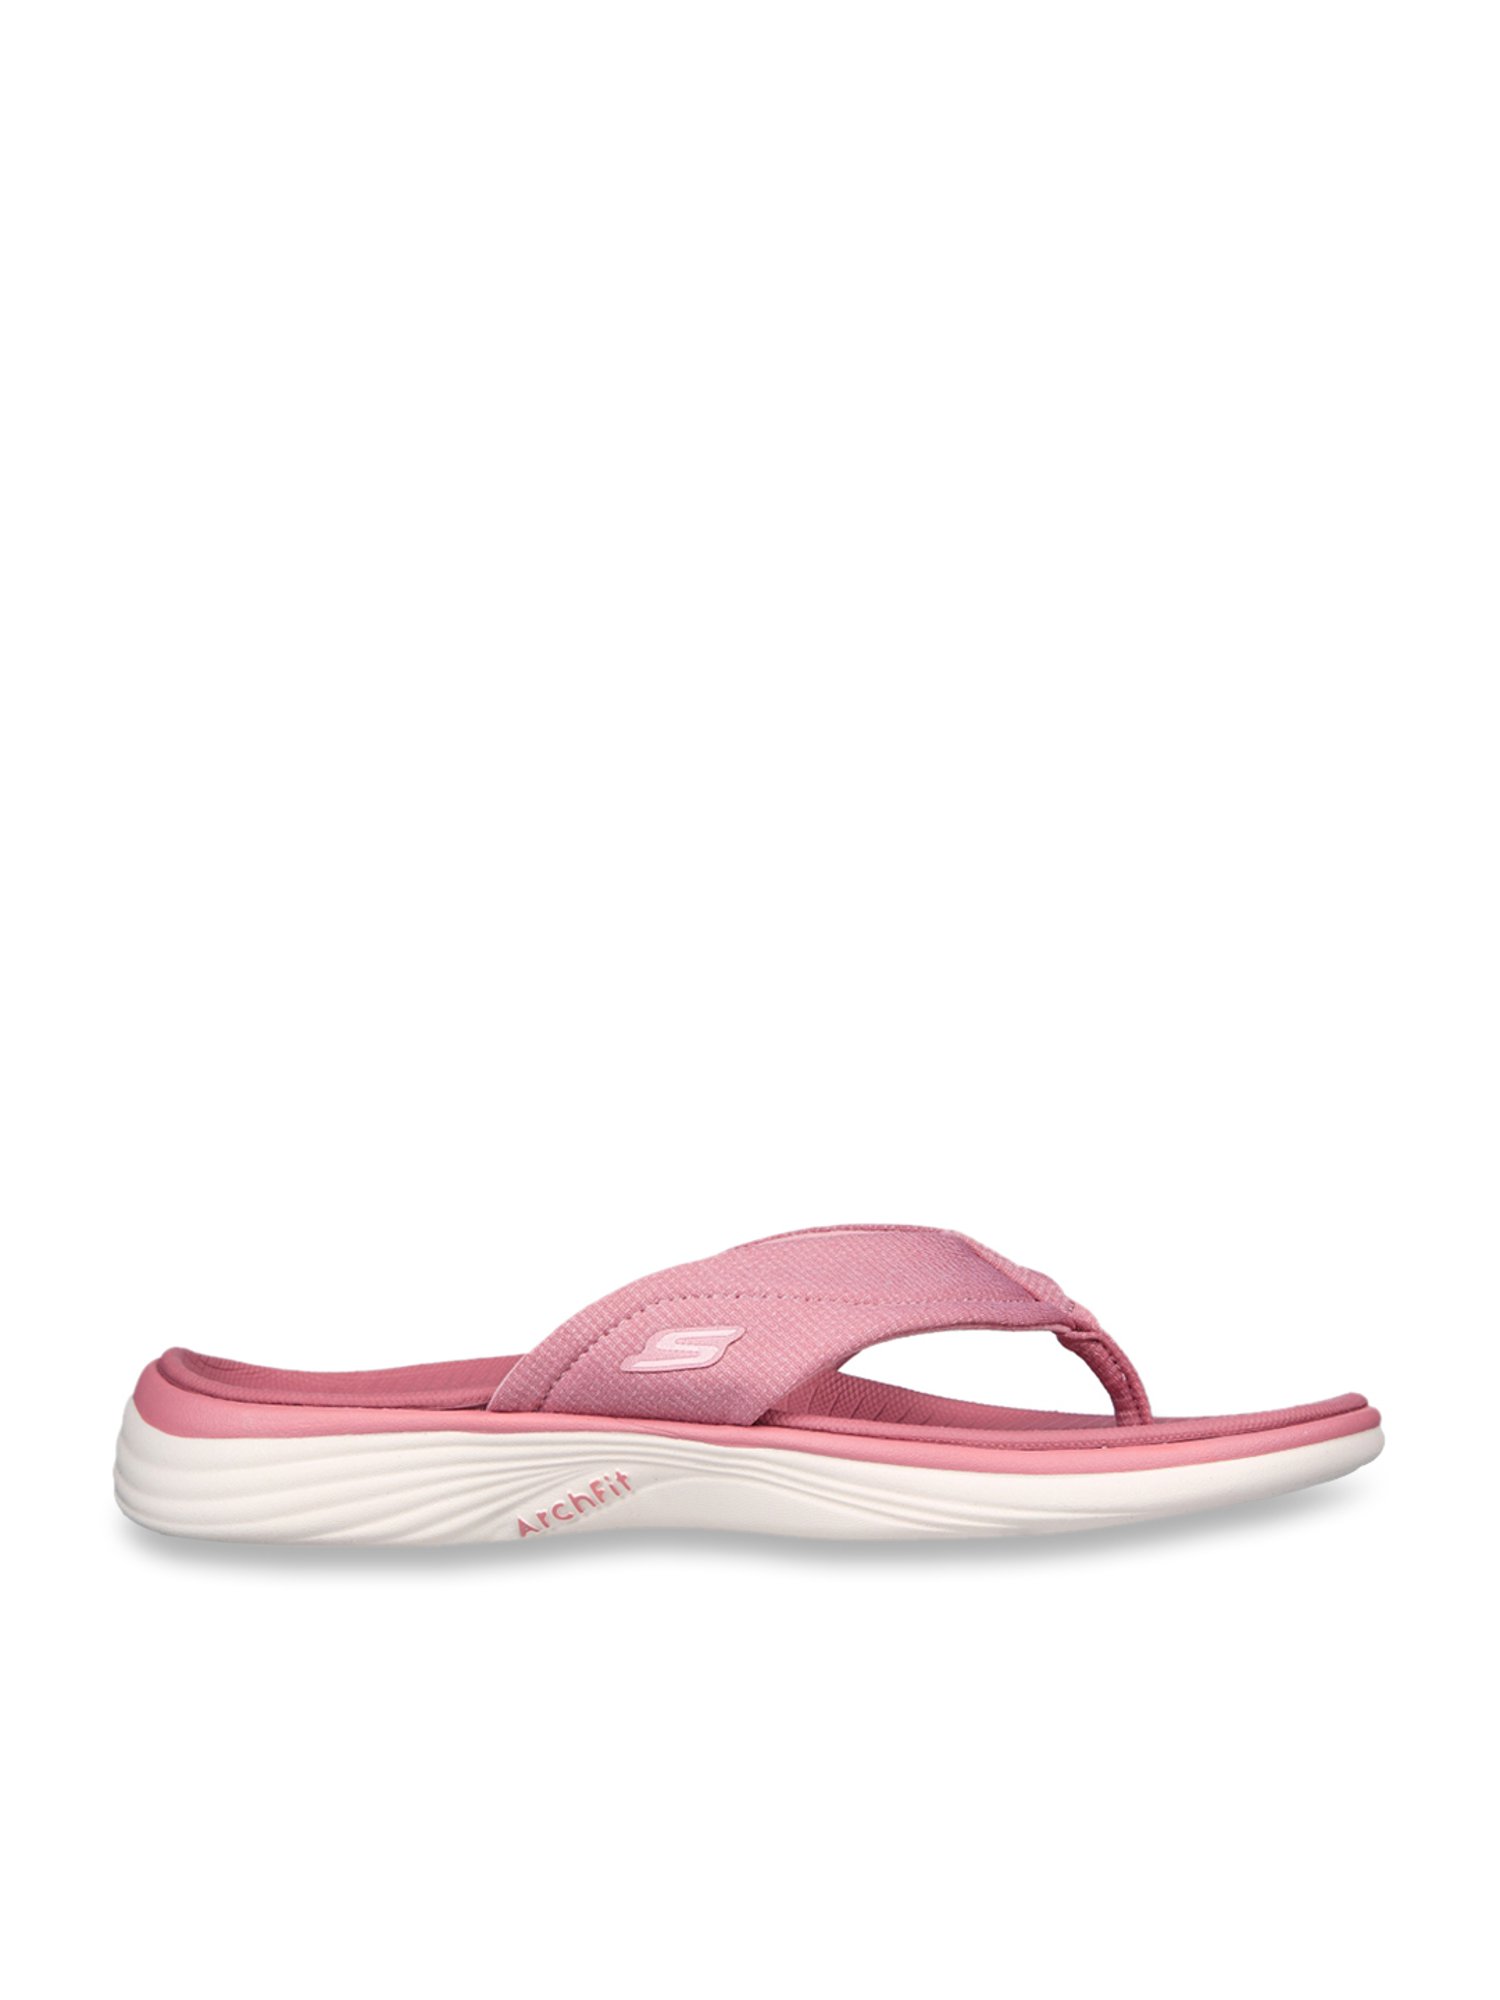 Buy Skechers Women's ARCH FIT RADIANCE Pink Thong Wedges at Best Price @ Tata